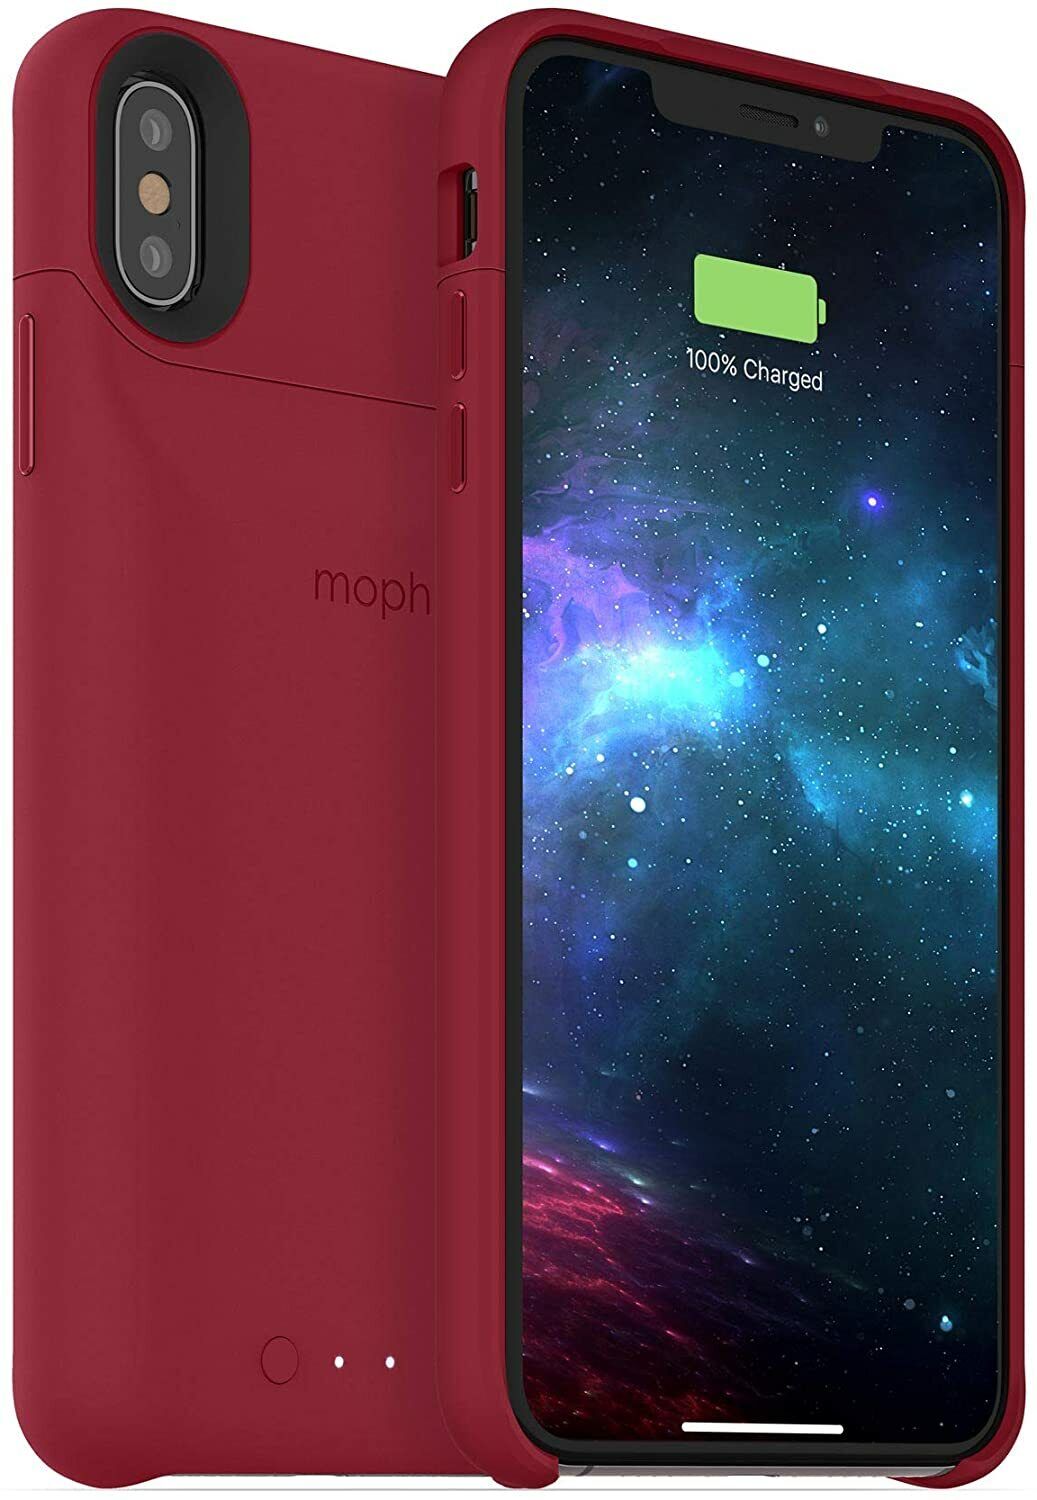 Mophie Juice Pack Access Battery Case For iPhone Xs Max - Dark Red